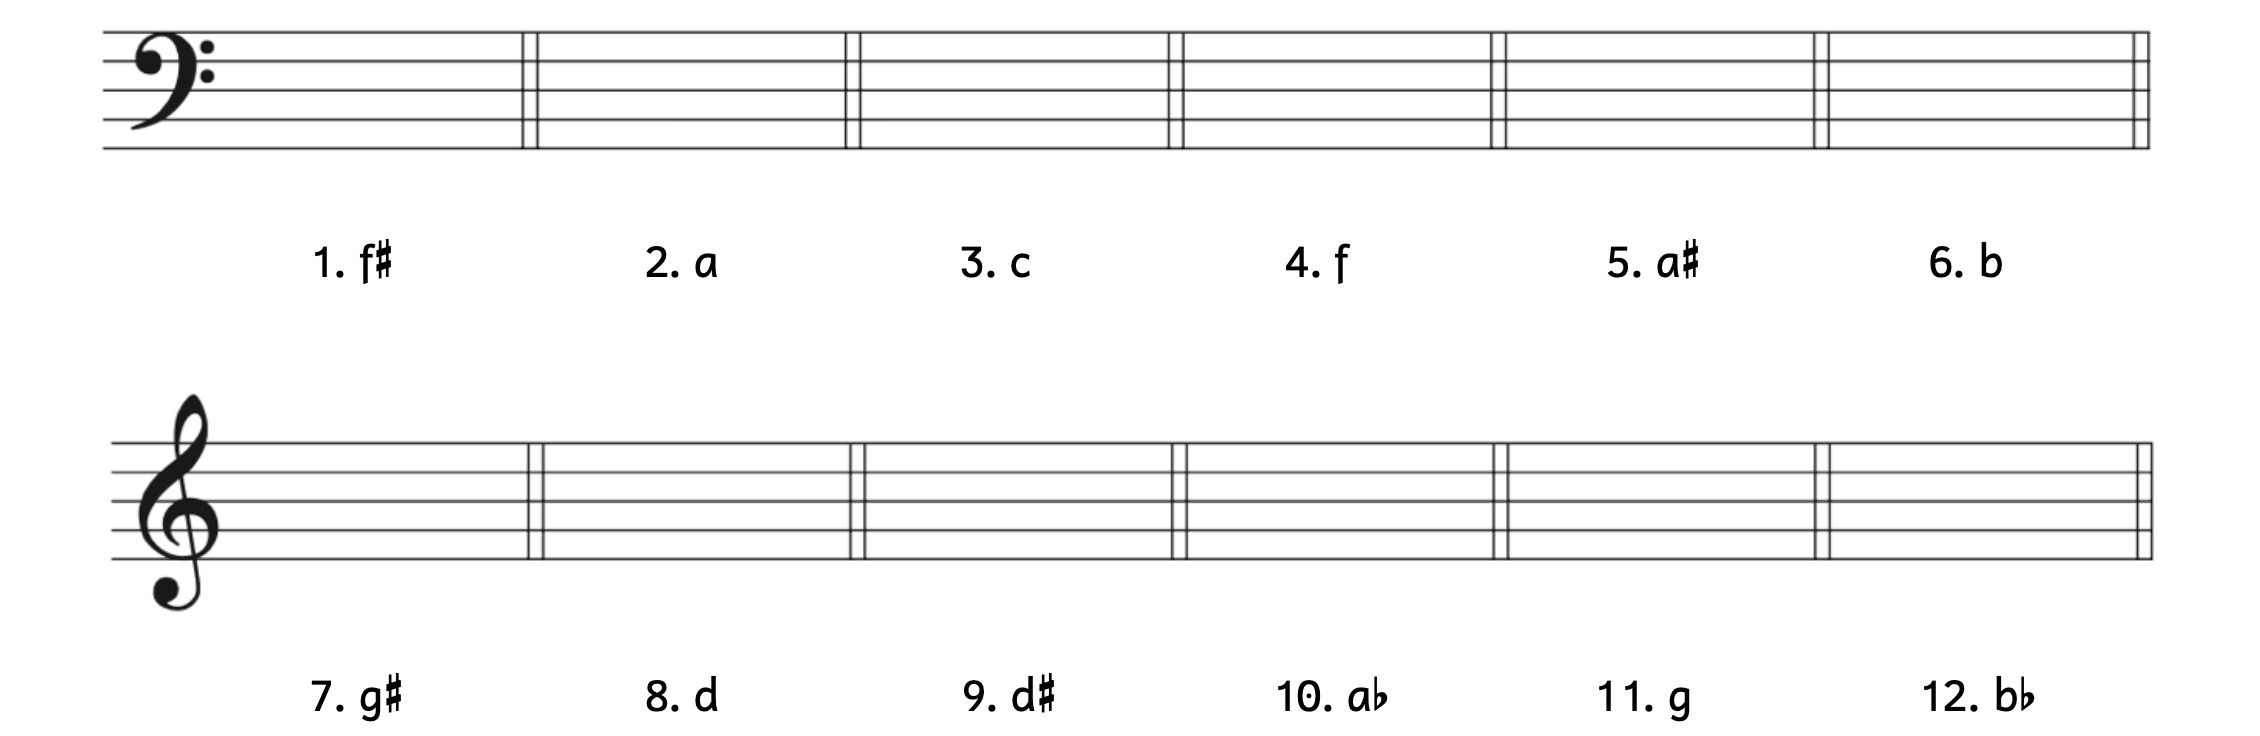 Numbers 1 through 6 are in bass clef. Number 1, F-sharp minor. Number 2, A-minor. Number 3, C minor. Number 4, F minor. Number 5, A-sharp minor. Number 6, B minor. Numbers 7 through 12 are in treble clef. Number 7, G-sharp minor. Number 8, D minor. Number 9, D-sharp minor. Number 10, A-flat minor. Number 11, G minor. Number 12, B-flat minor.